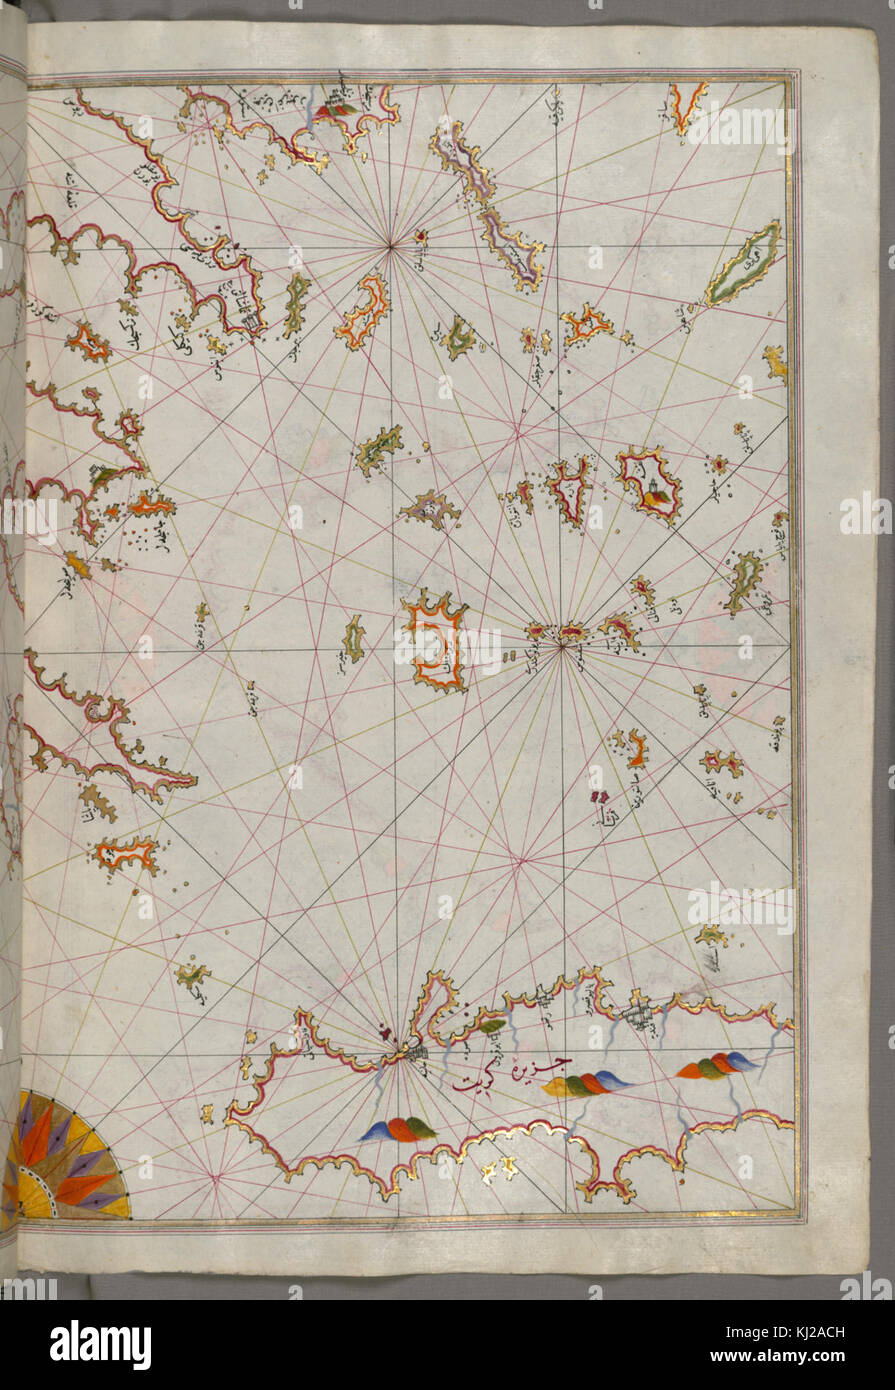 Piri Reis - Map of the Cyclades Islands Between the Peloponnese Peninsula and Crete - Walters W658129B - Full Page Stock Photo